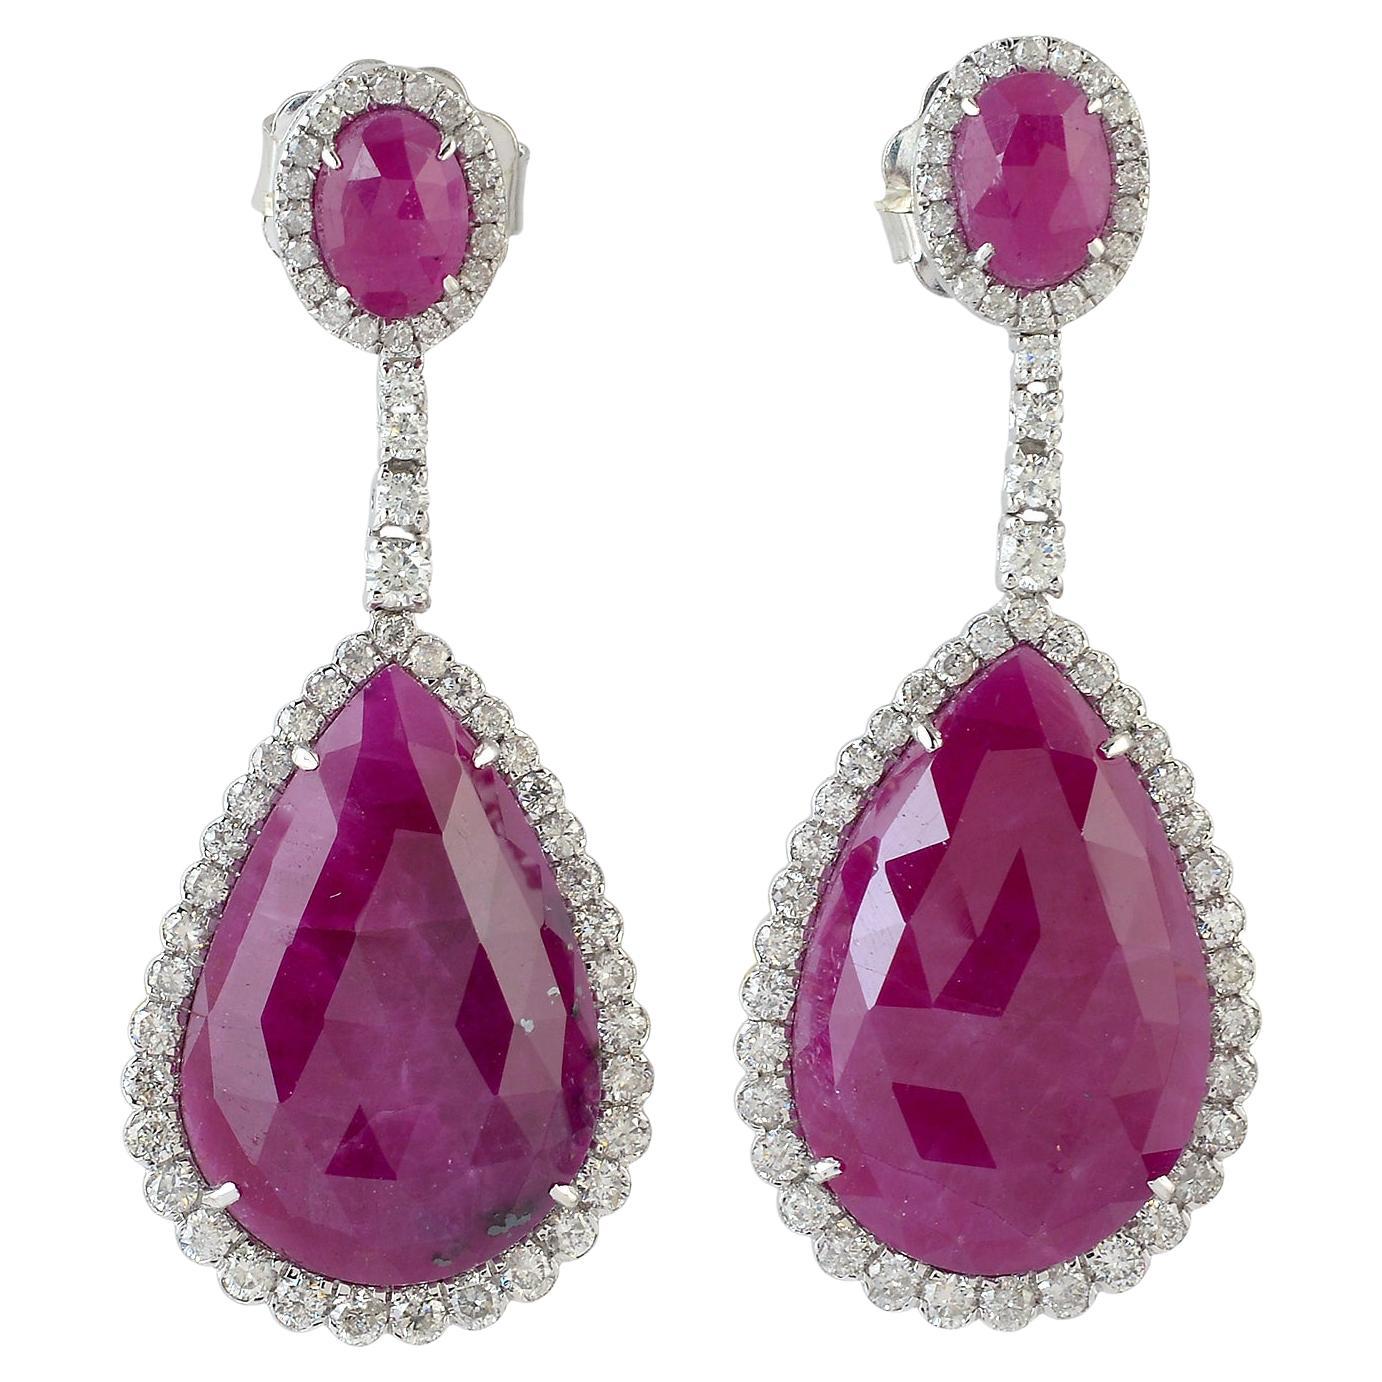 Pear & Oval Shaped Ruby 2 Tier Dangle Earrings With Diamonds In 18k White Gold For Sale